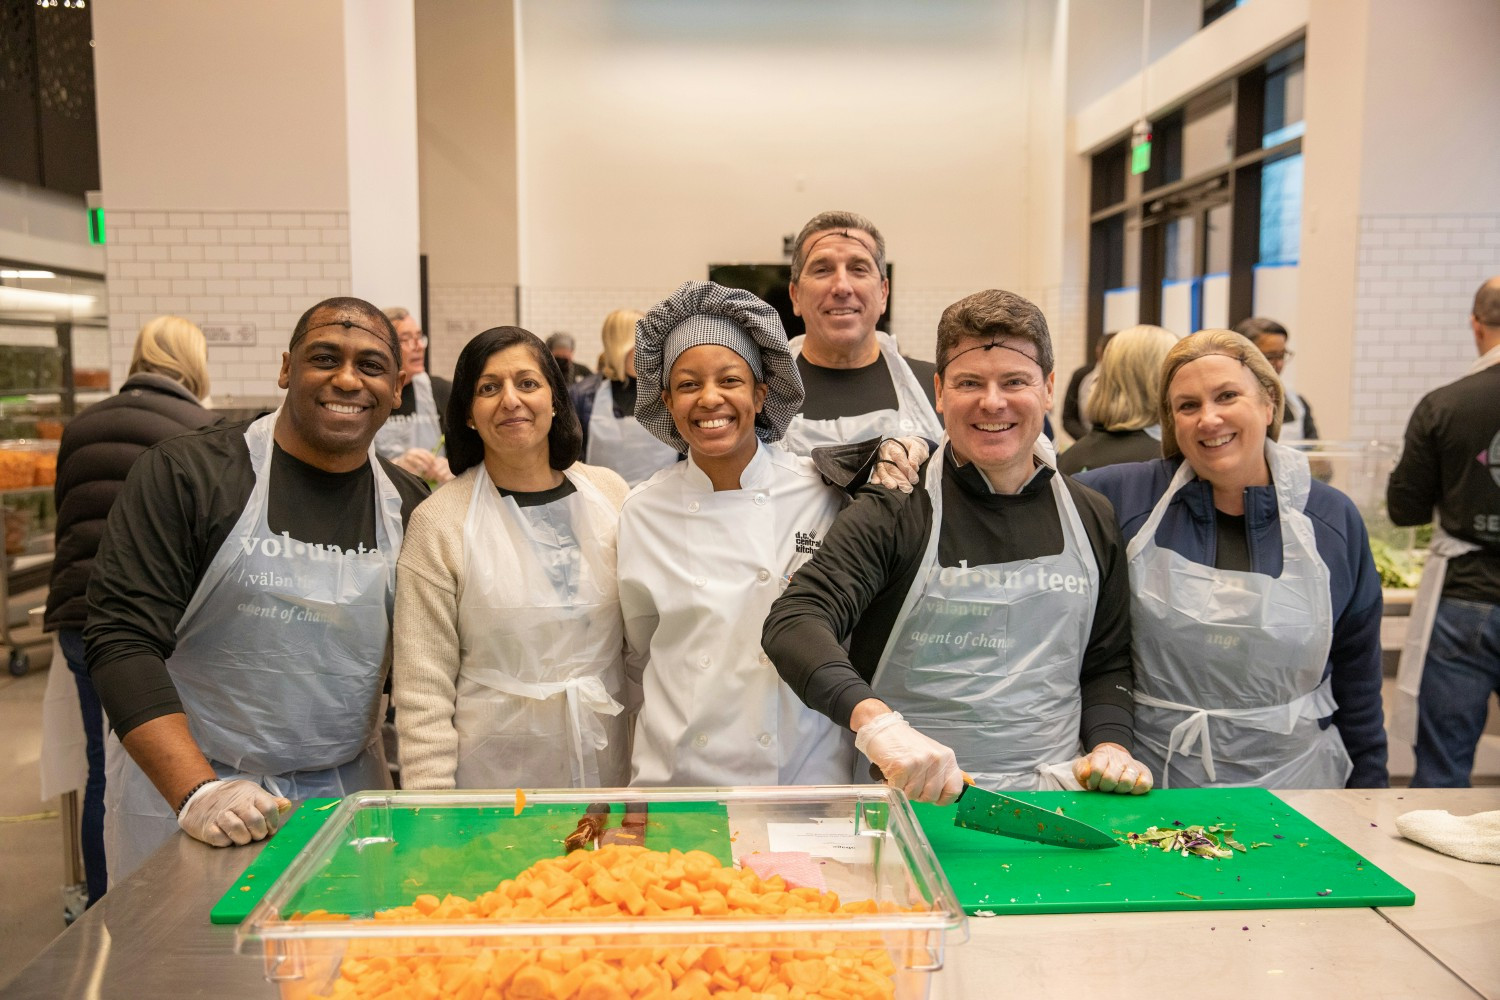 Marriott Executive Team at a volunteer event in support of D.C. Central Kitchen.